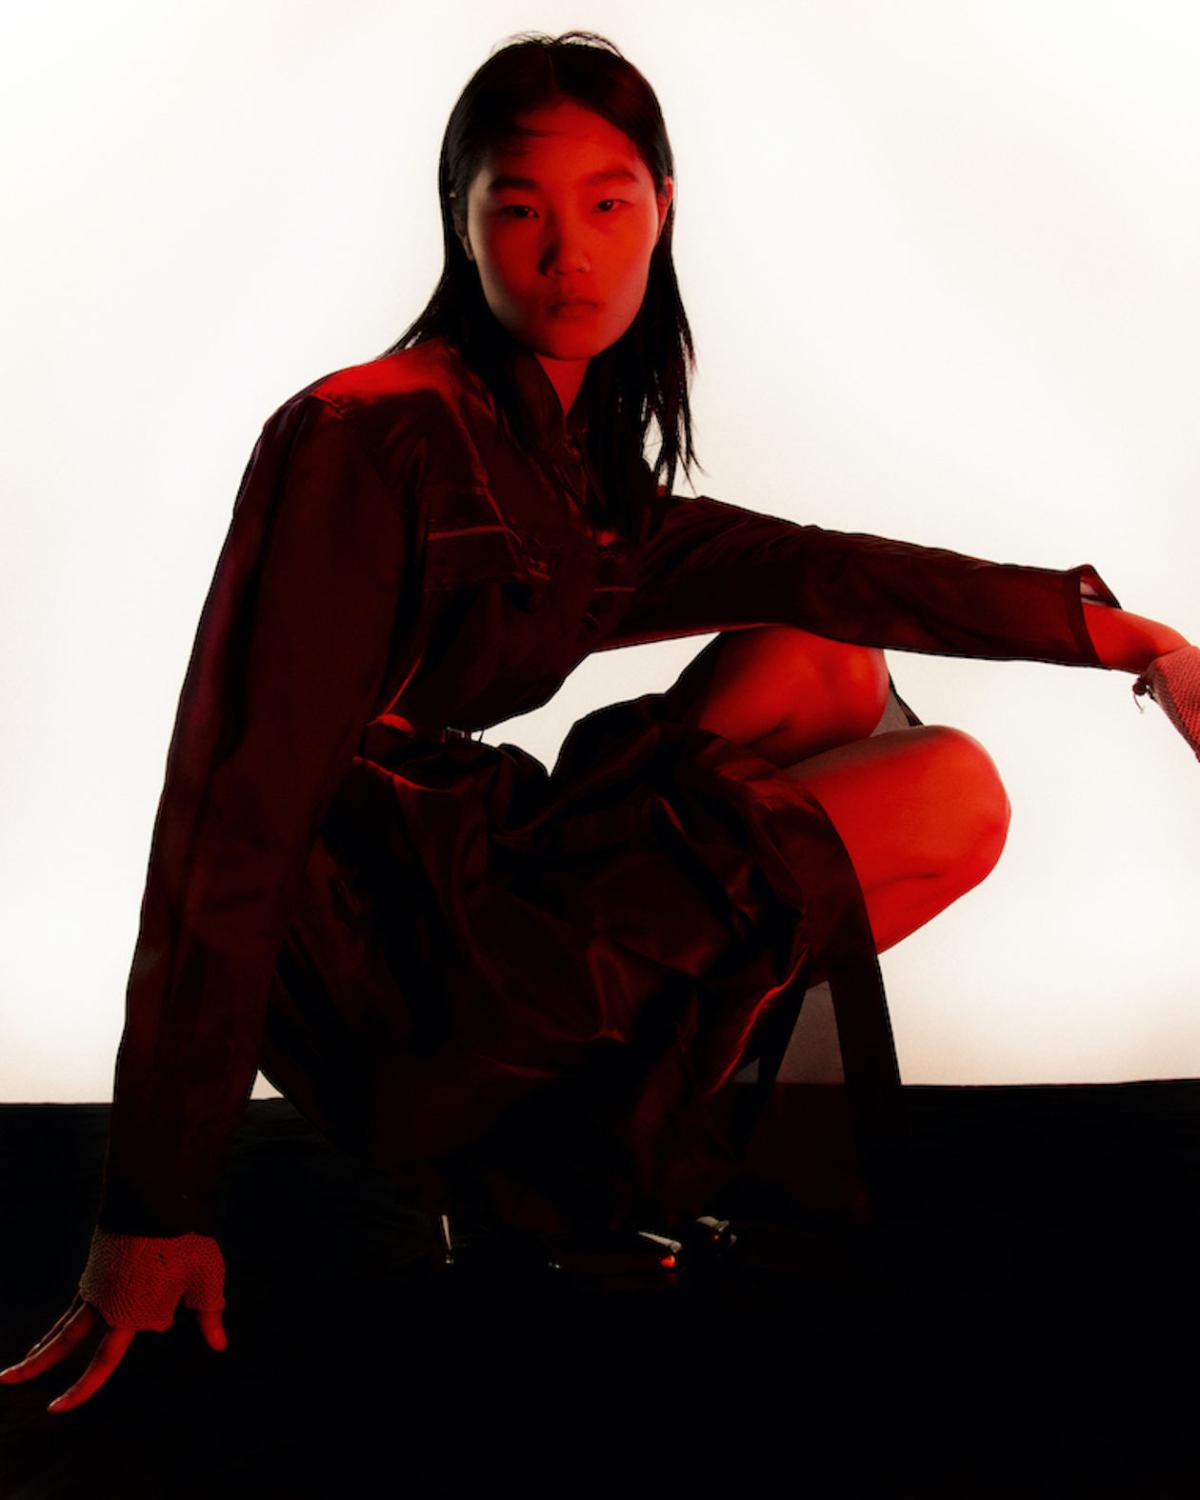 The Lady In Red: Canlan Wang by Pablo Freda for The WOW Magazine Spring 2022